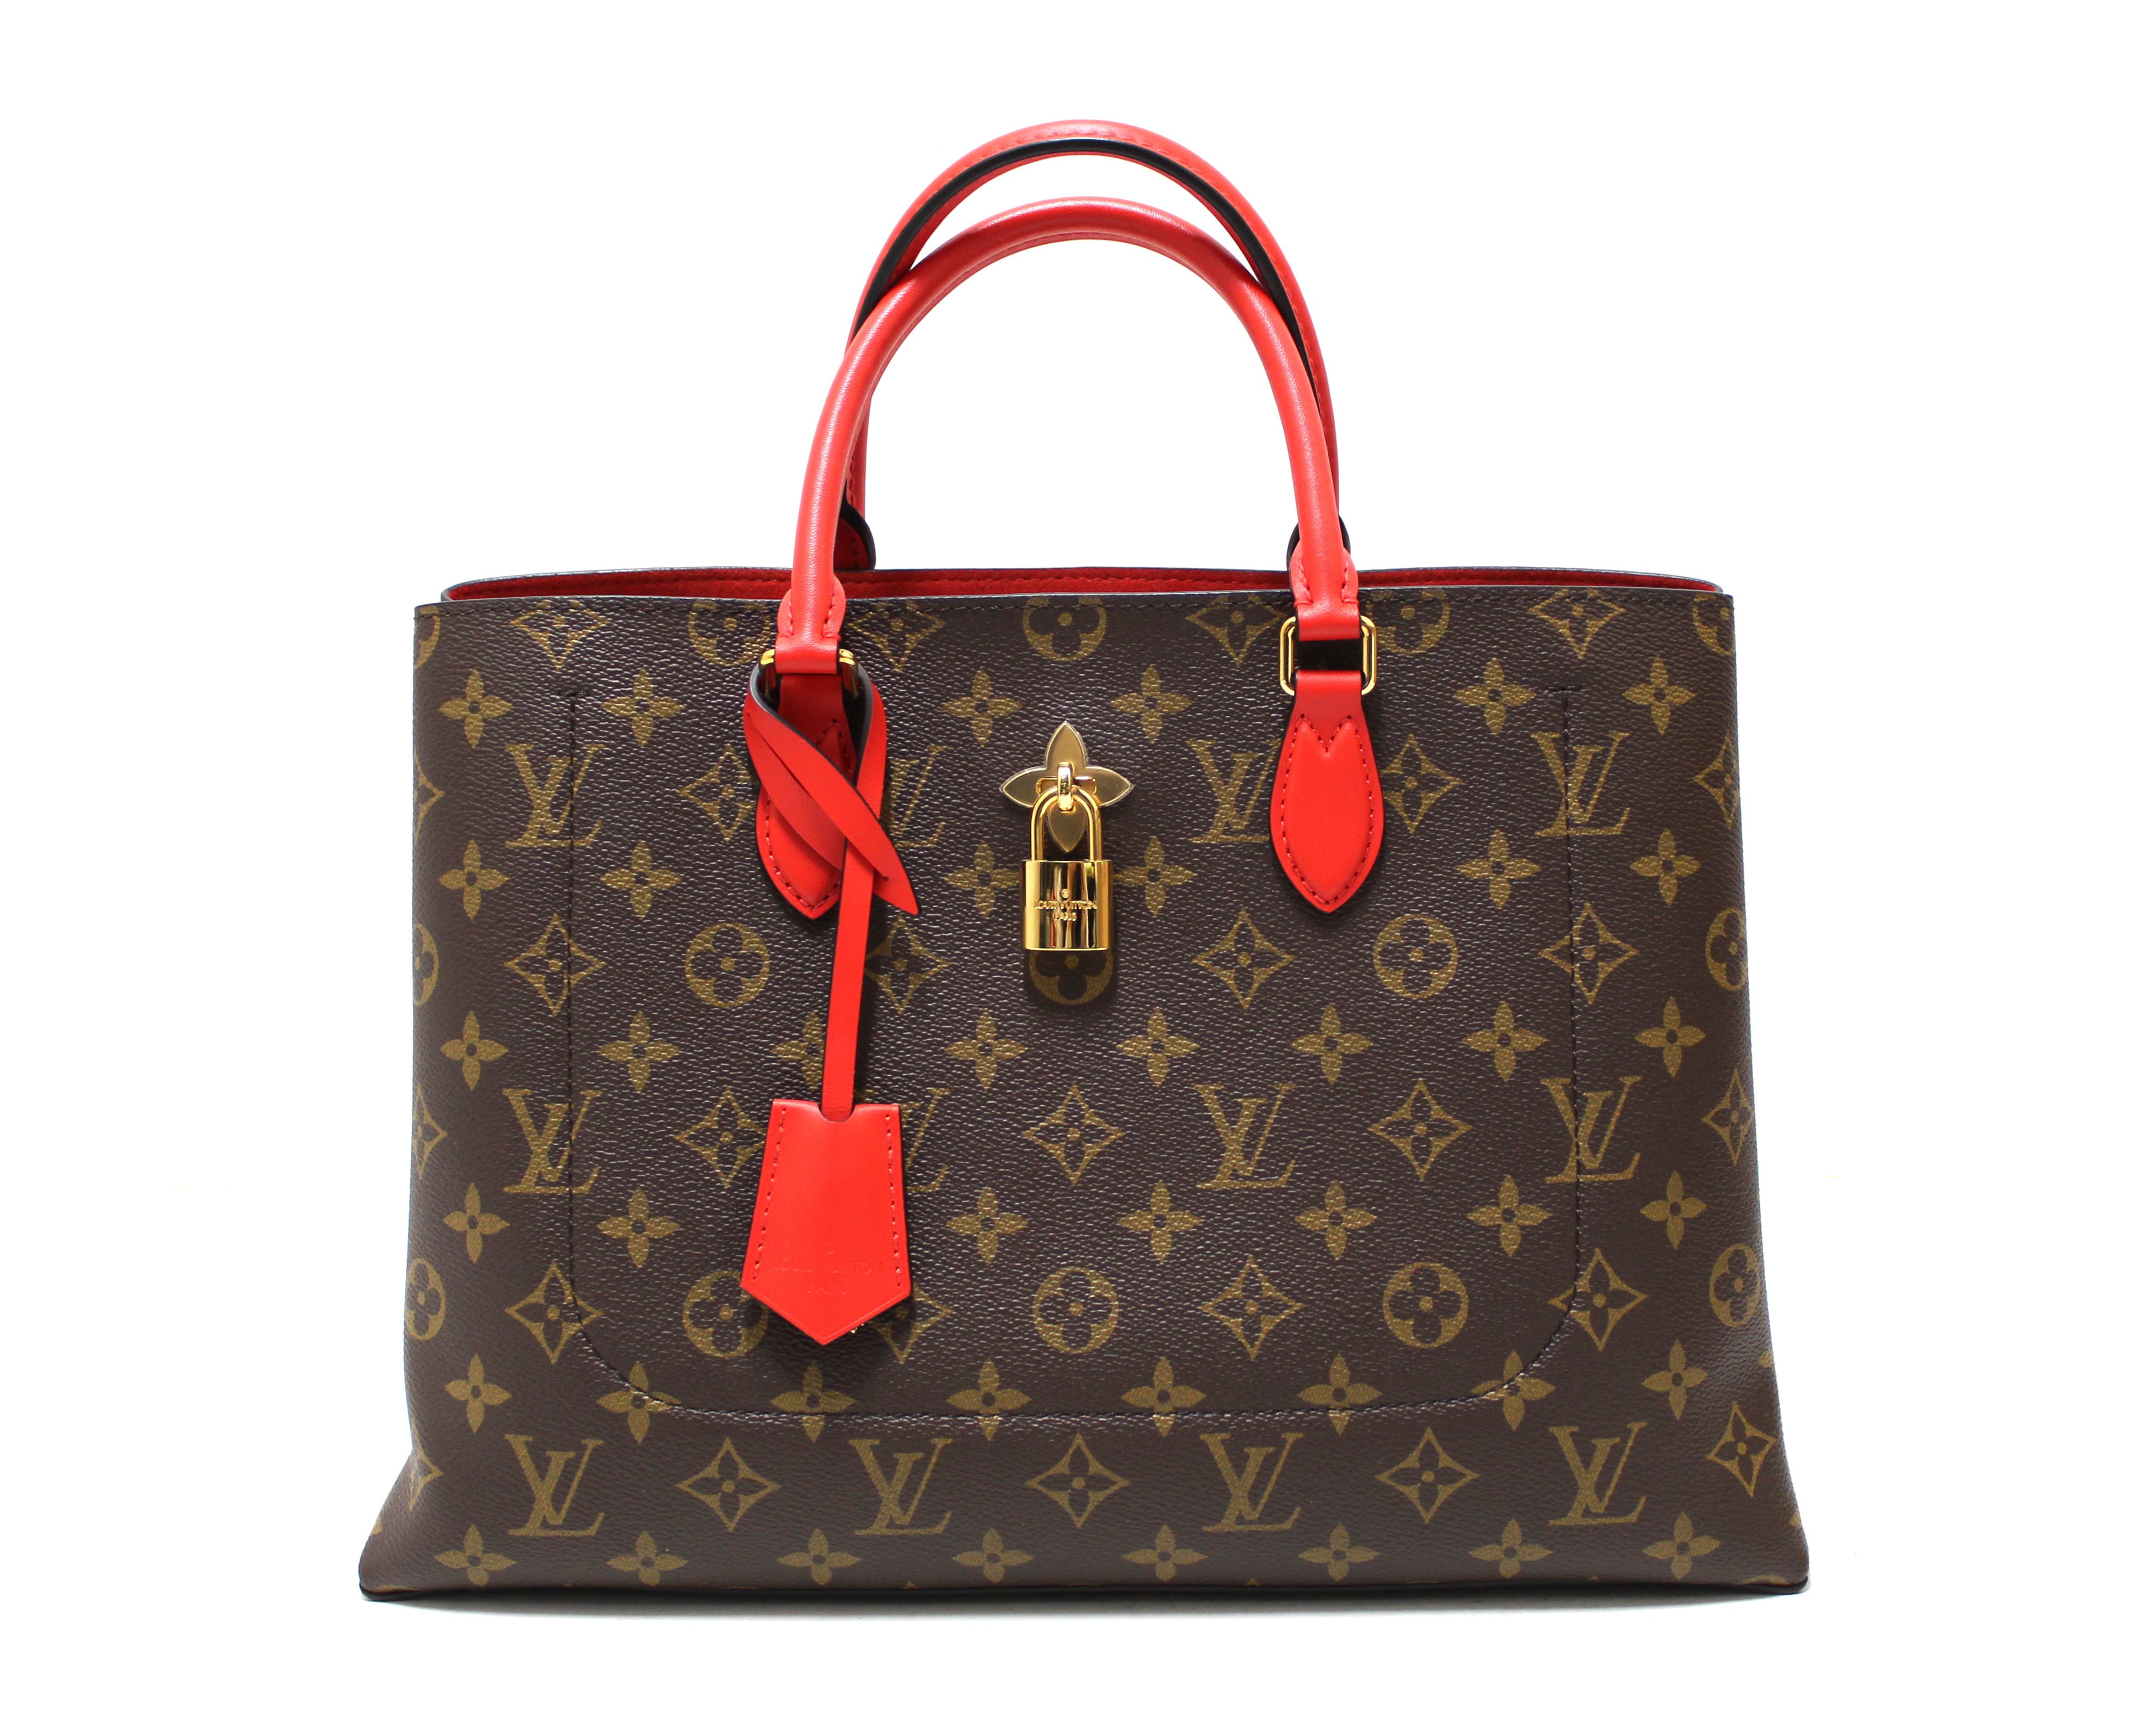 Authentic Louis Vuitton Poppy Red Monogram Canvas Flower Tote Hand Sho ...